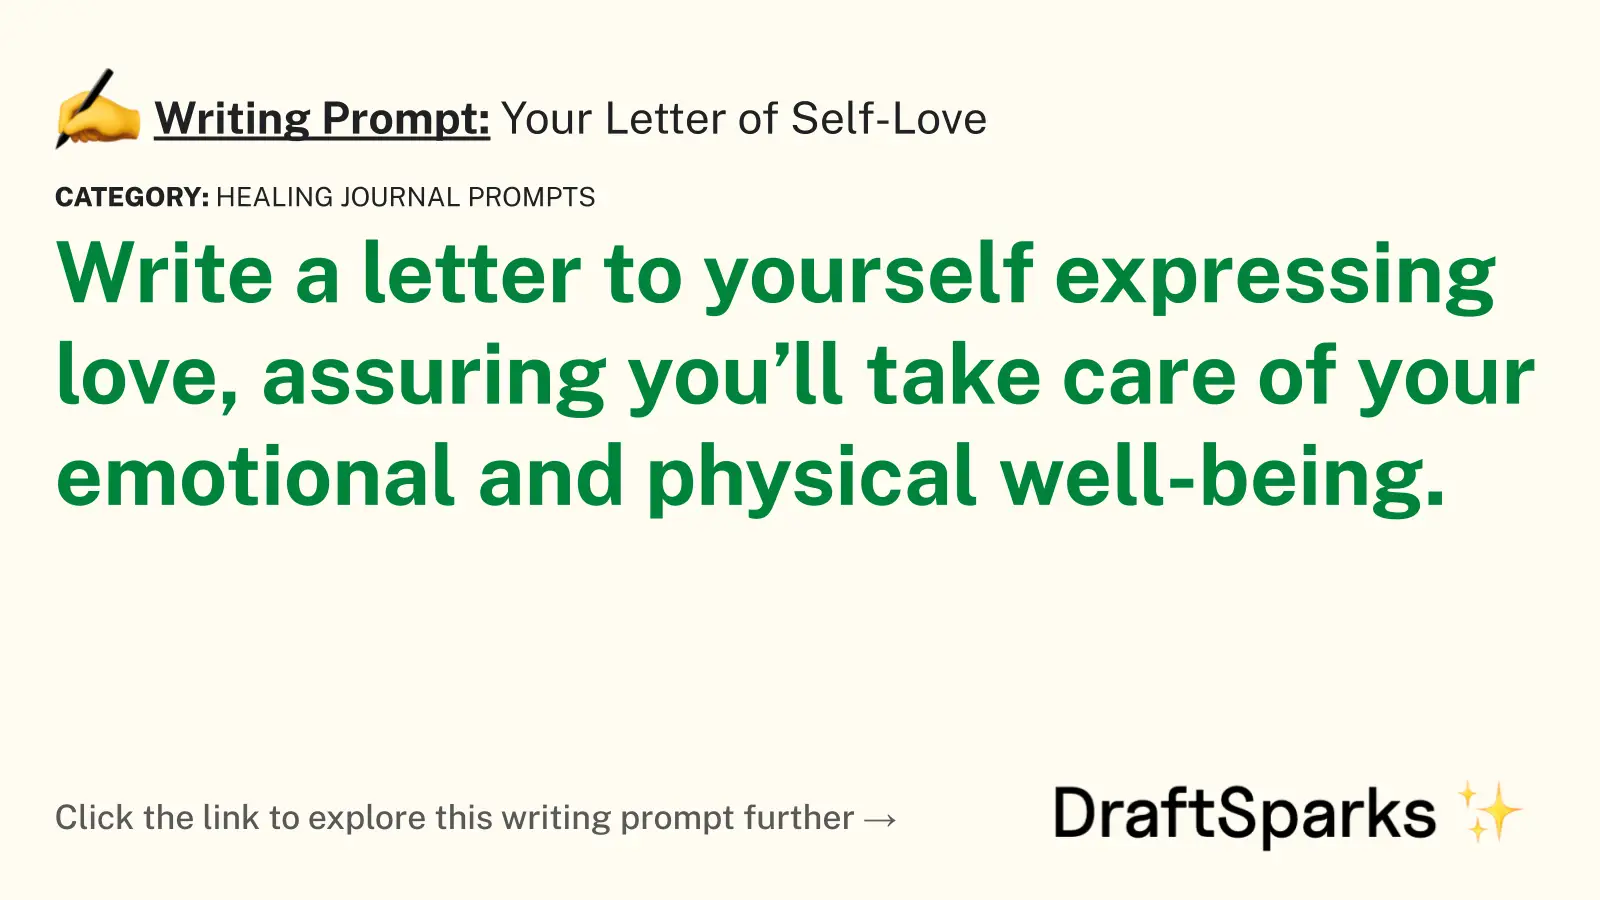 Your Letter of Self-Love